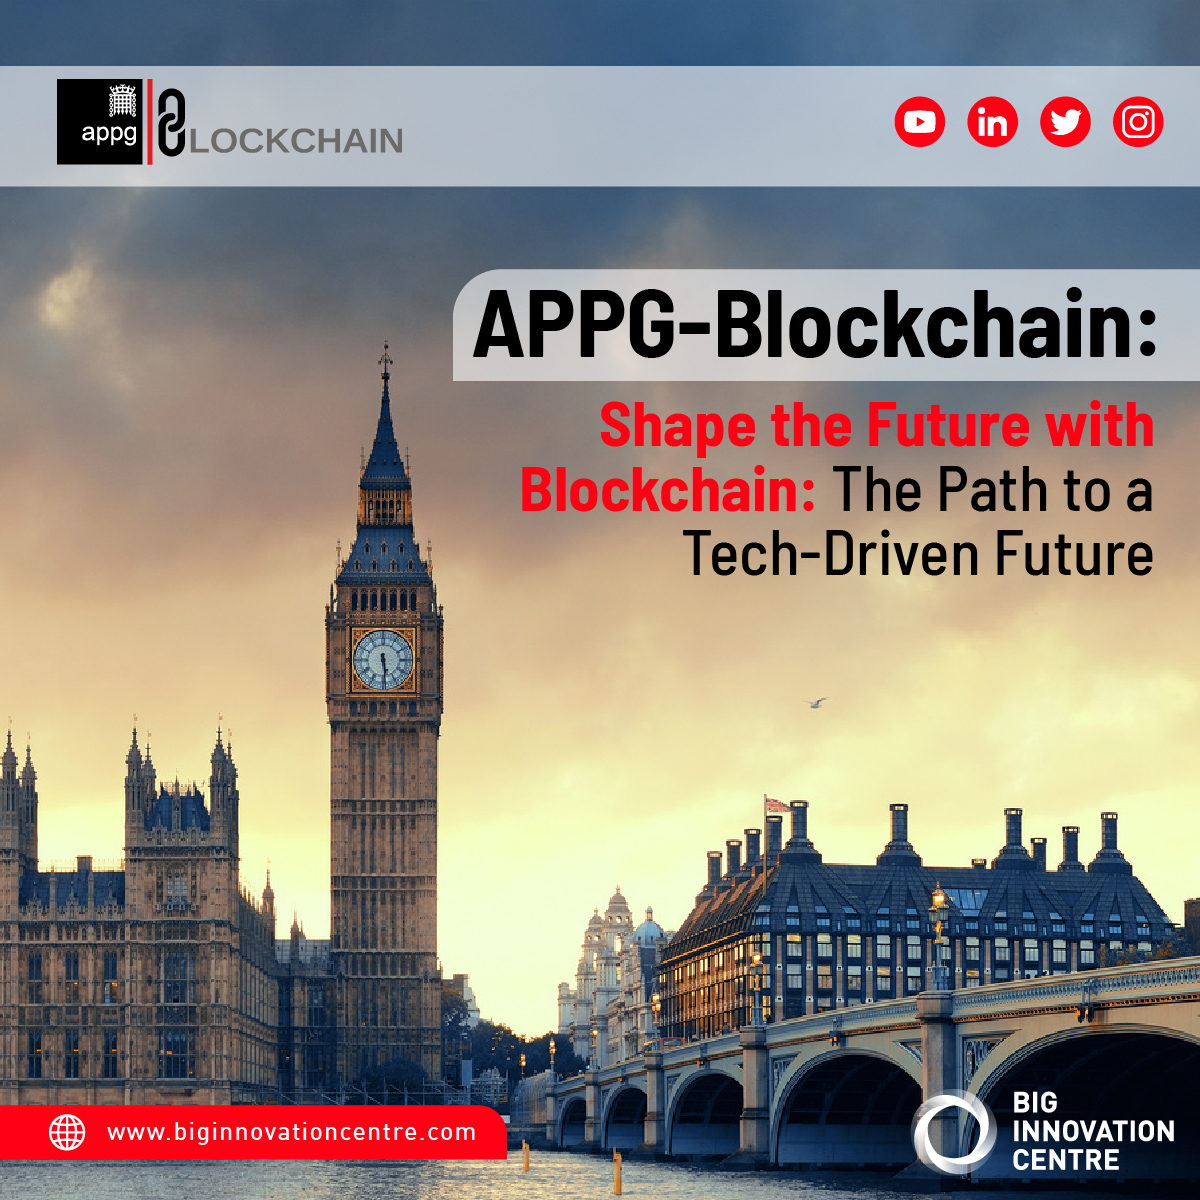 Join the All-Party Parliamentary Group on Blockchain (#APPGBlockchain) with #BIC to influence policy-making, unlock opportunities and contribute to the thriving blockchain ecosystem in the UK. Together, let's shape a more innovative and technologically advanced future for all.